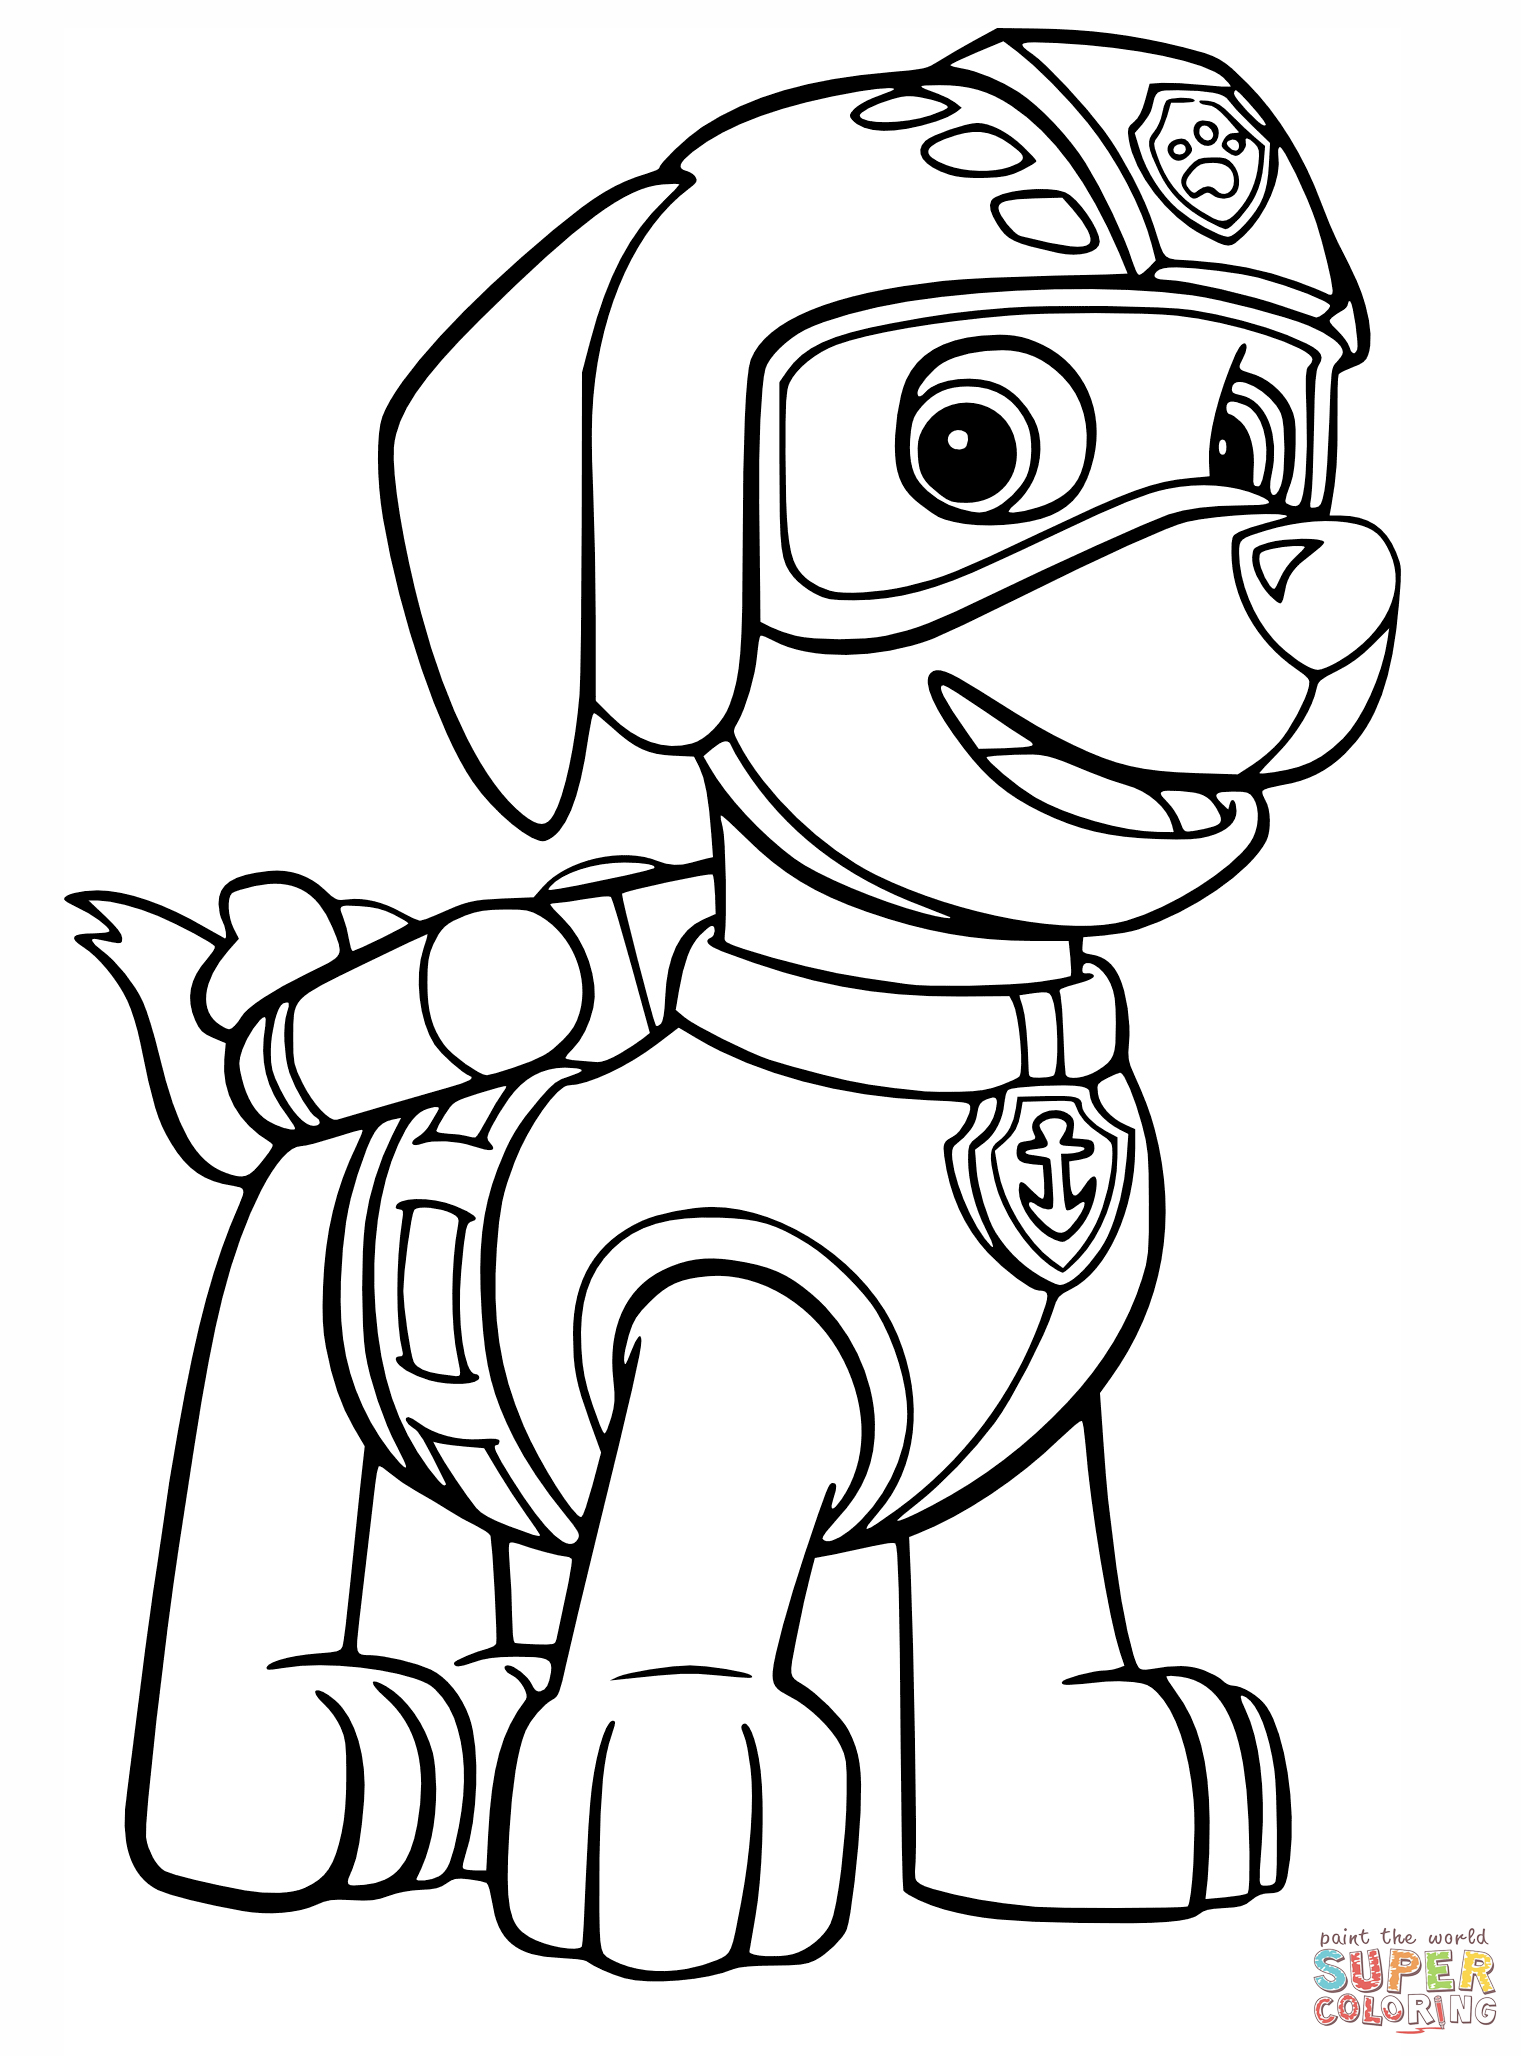 Paw Patrol Zuma's Badge coloring page | Free Printable Coloring Pages